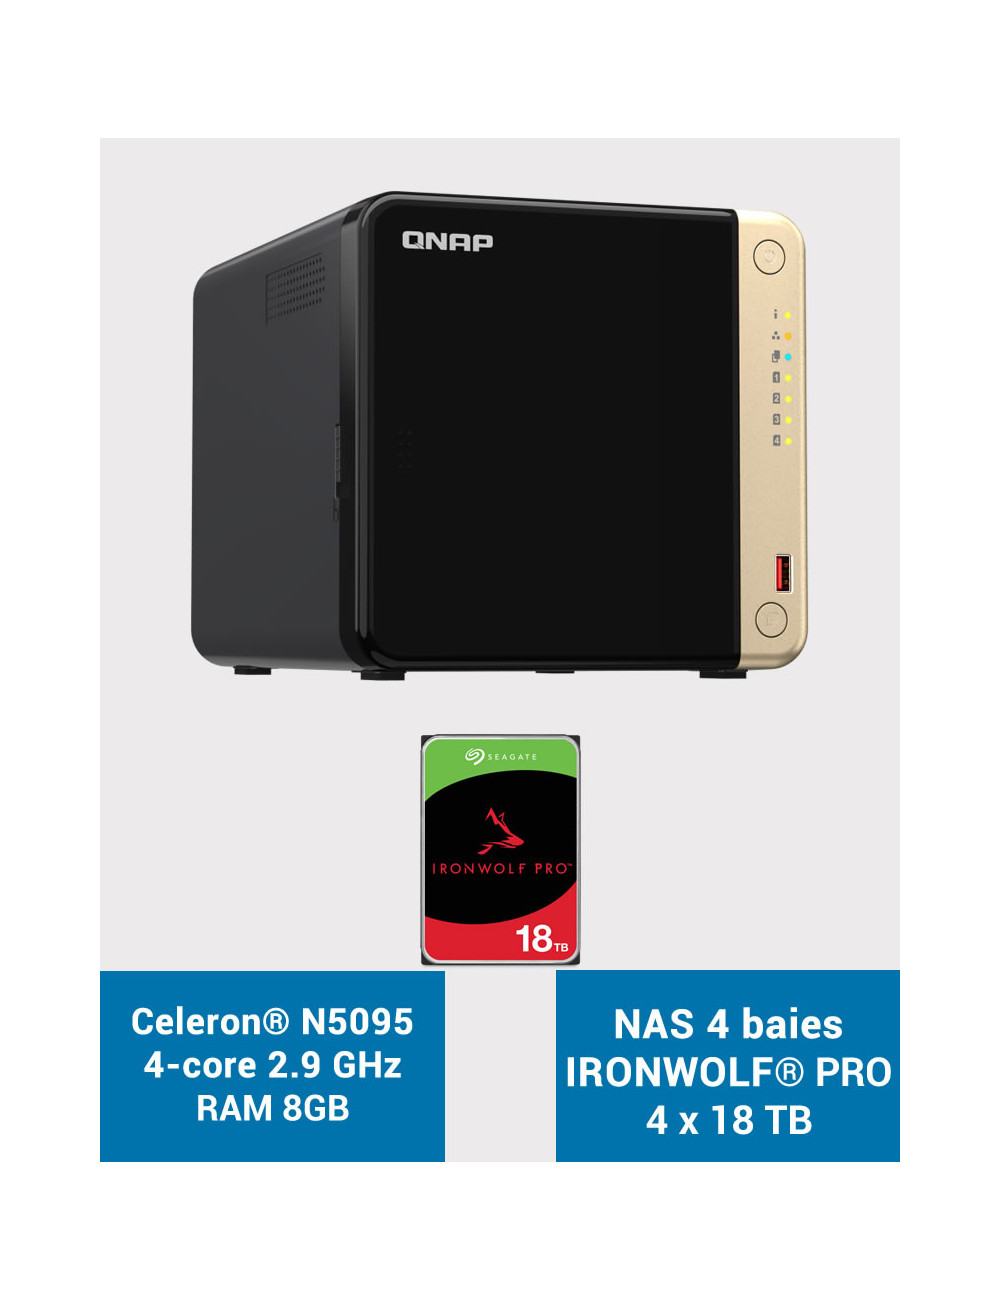 QNAP TS-464 8GB Serveur NAS 4 baies IRONWOLF PRO 72To (4x18To)